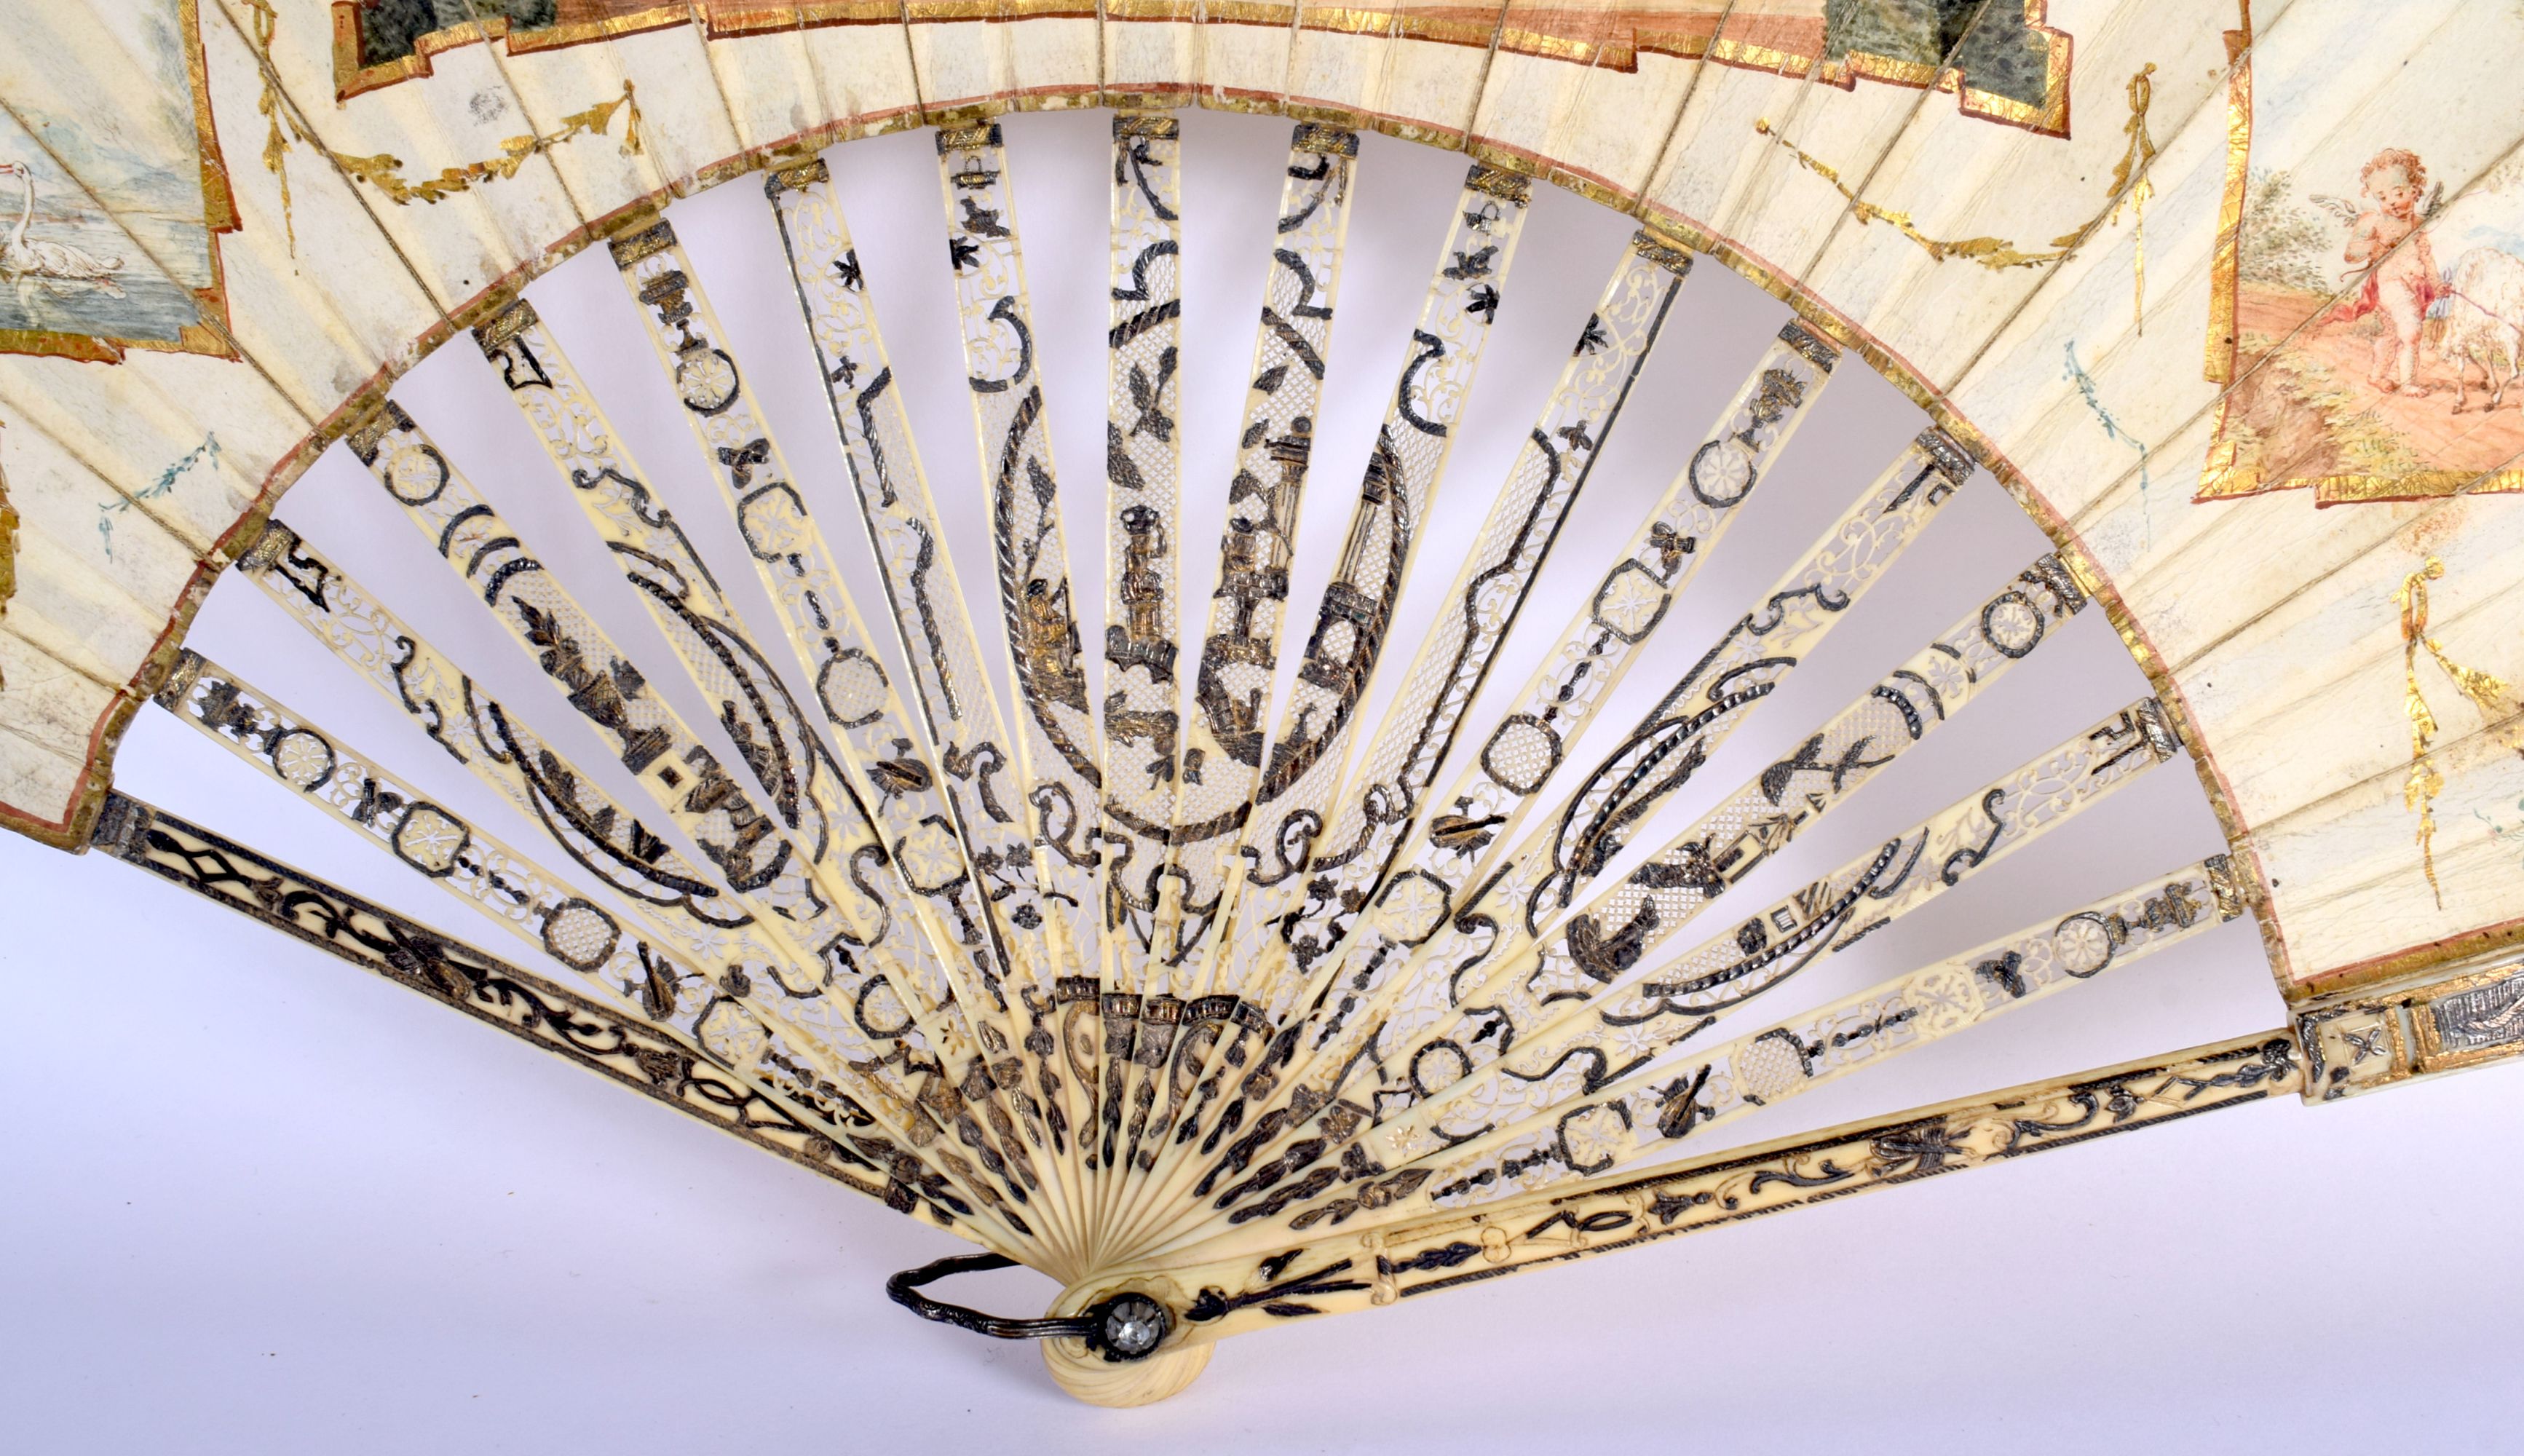 A FINE LATE 18TH CENTURY EUROPEAN GRAND TOUR TYPE FAN with paper leaf supports and silvered sticks. - Image 5 of 6